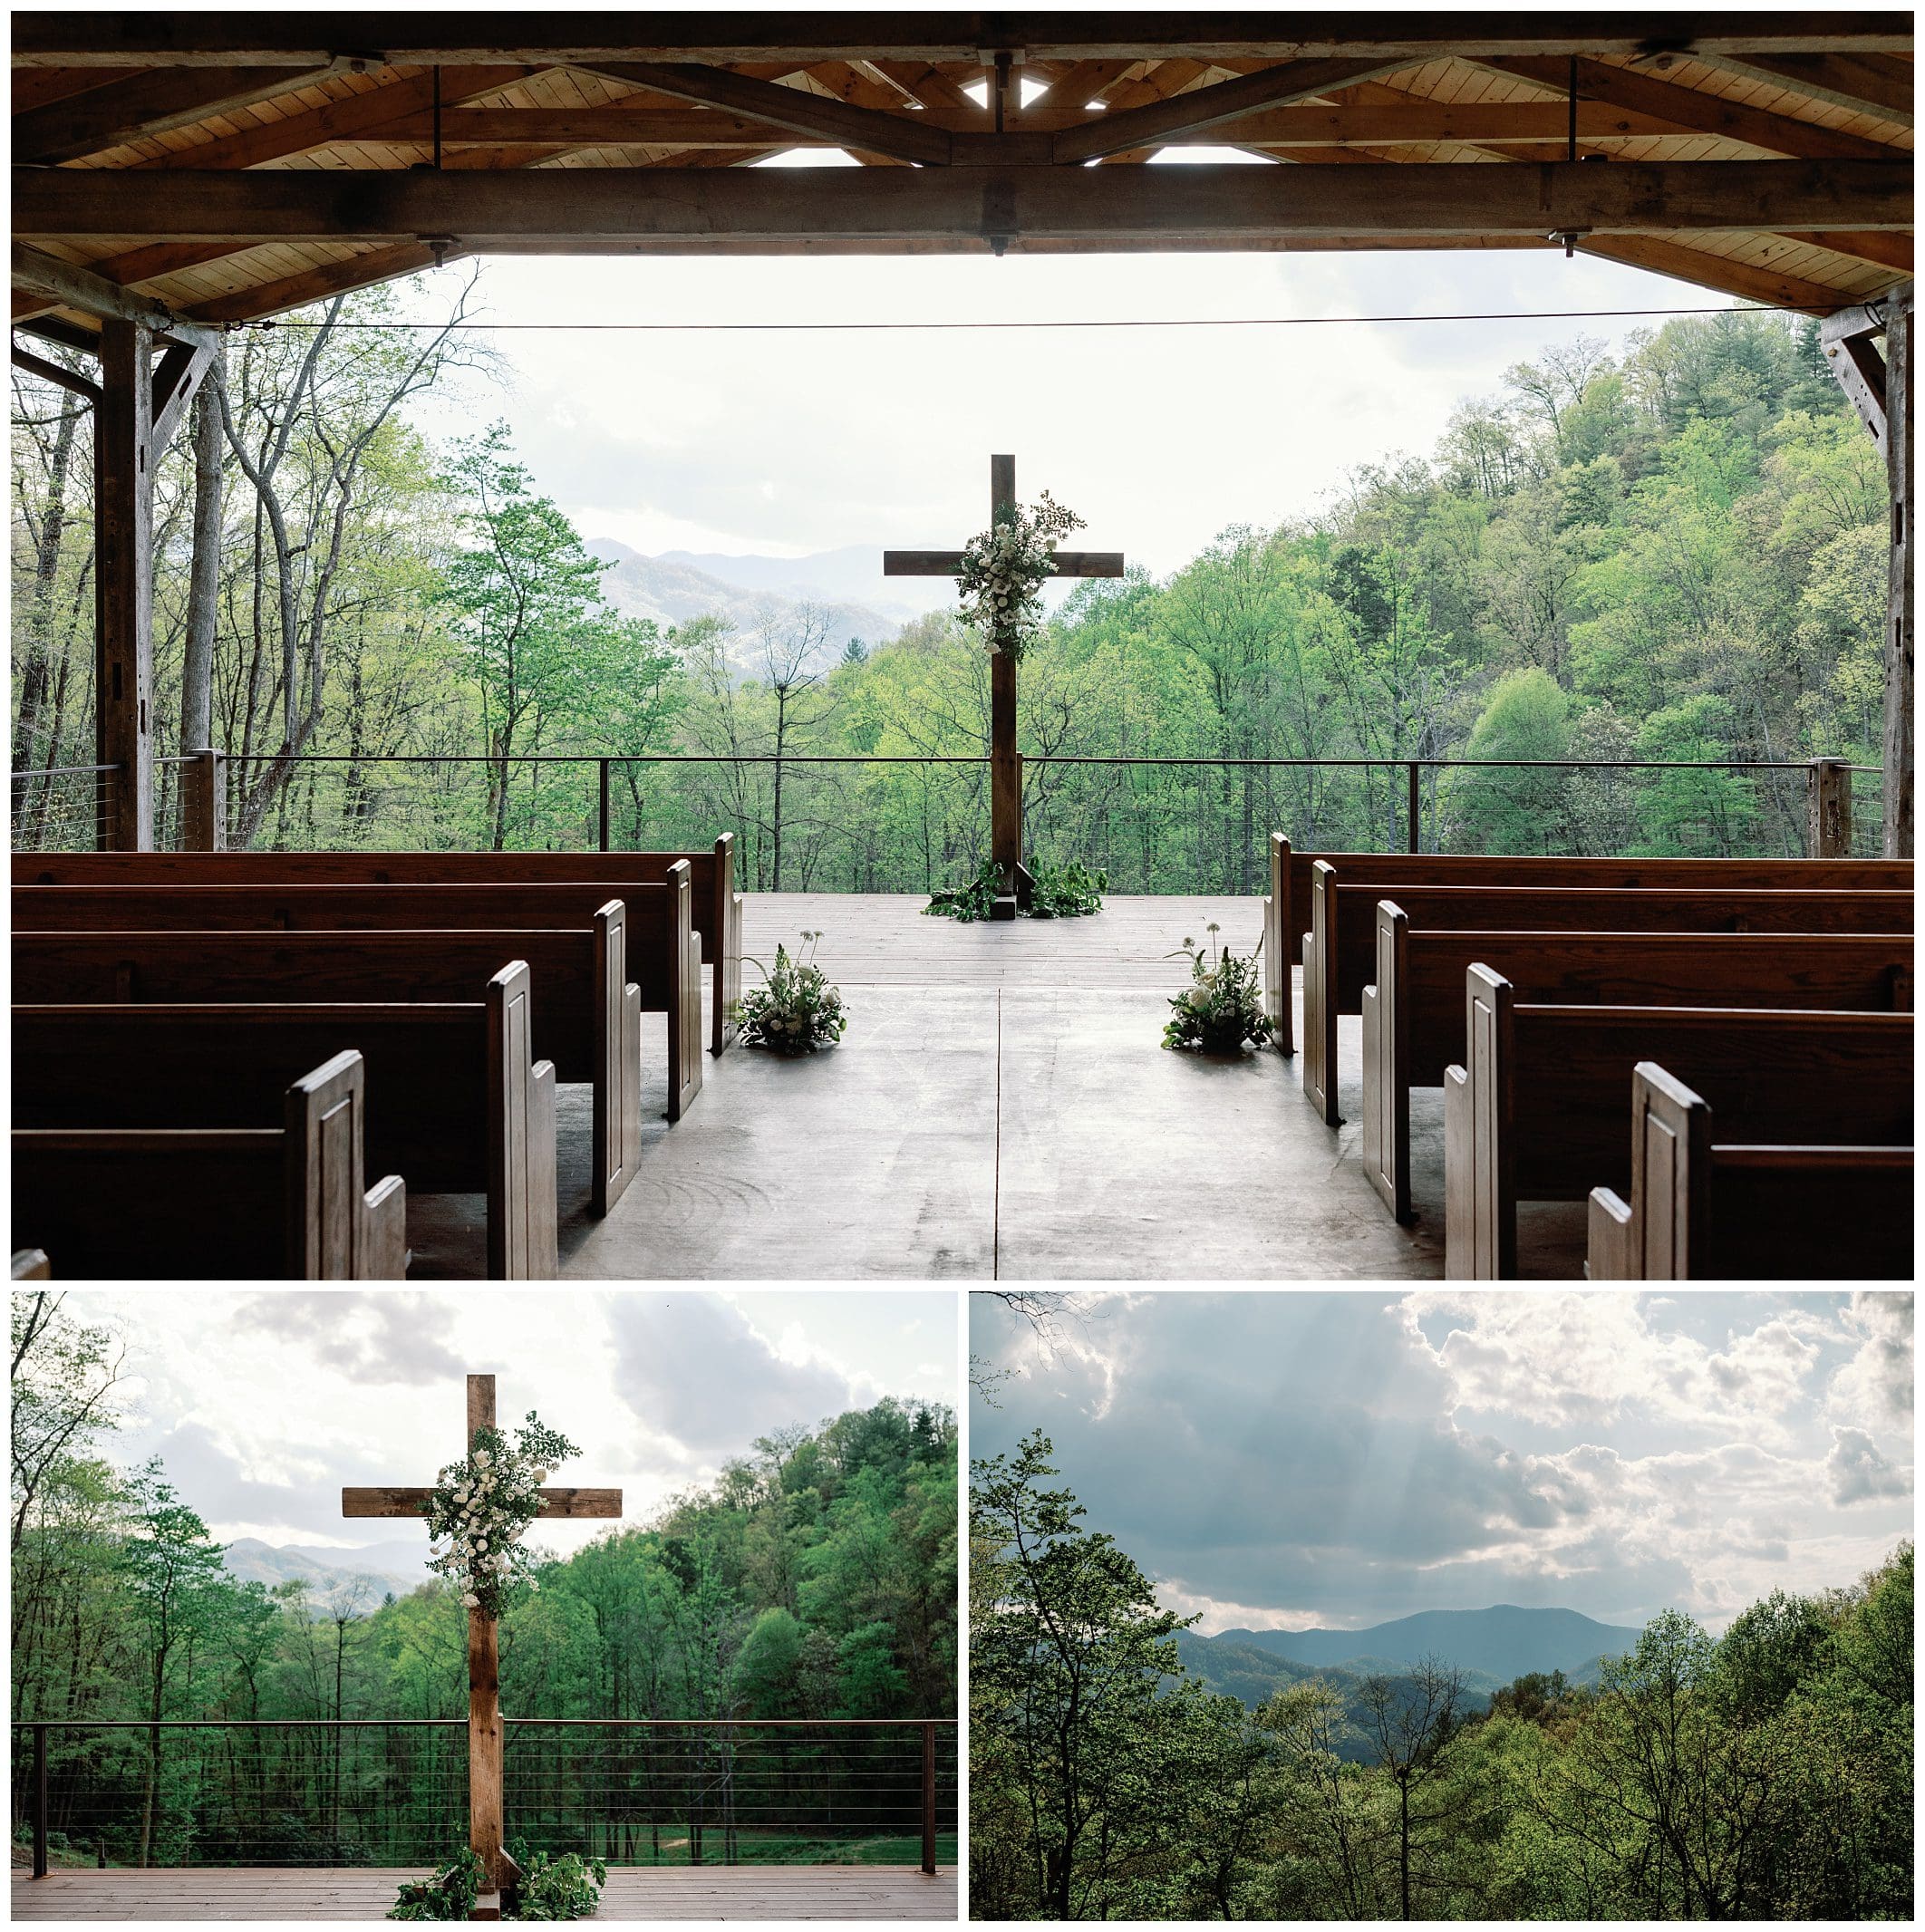 Open-air chapel with wooden pews facing a cross, set against a backdrop of lush green mountains and cloudy skies.